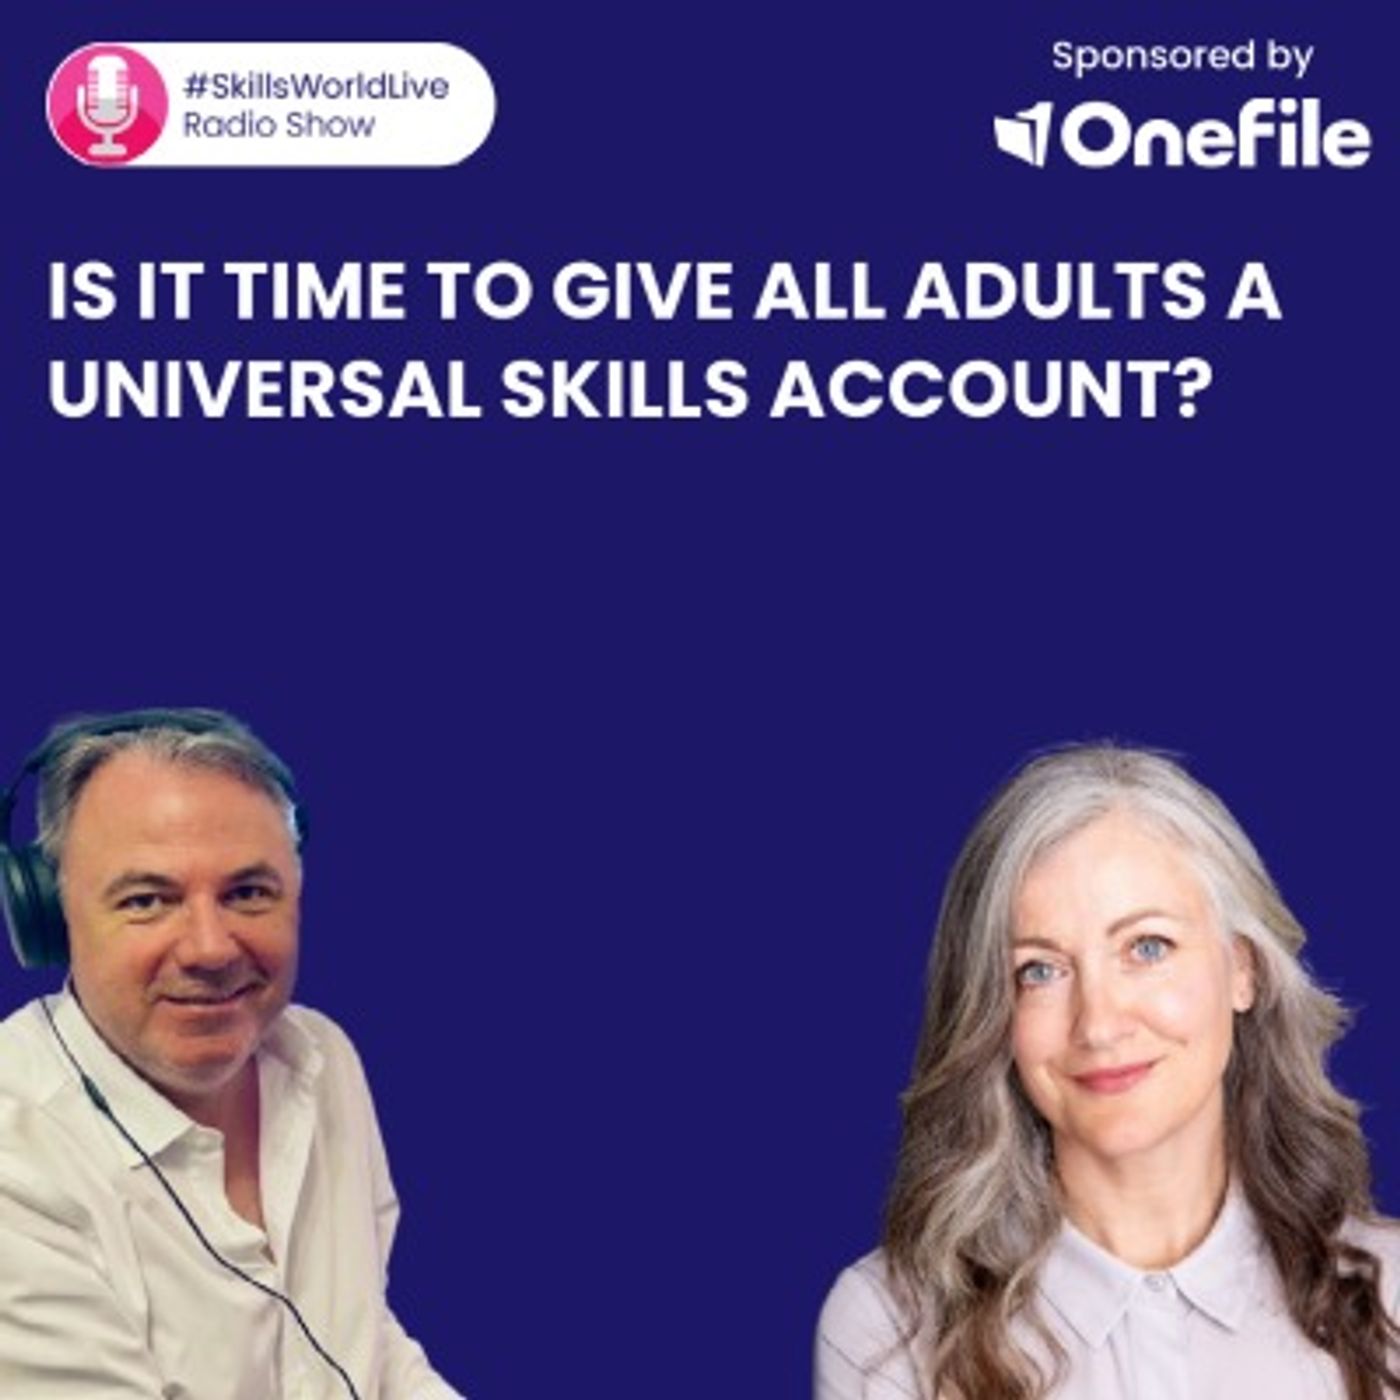 Is it time to give all adults a universal skills account? #SkillsWorldLive 3.10